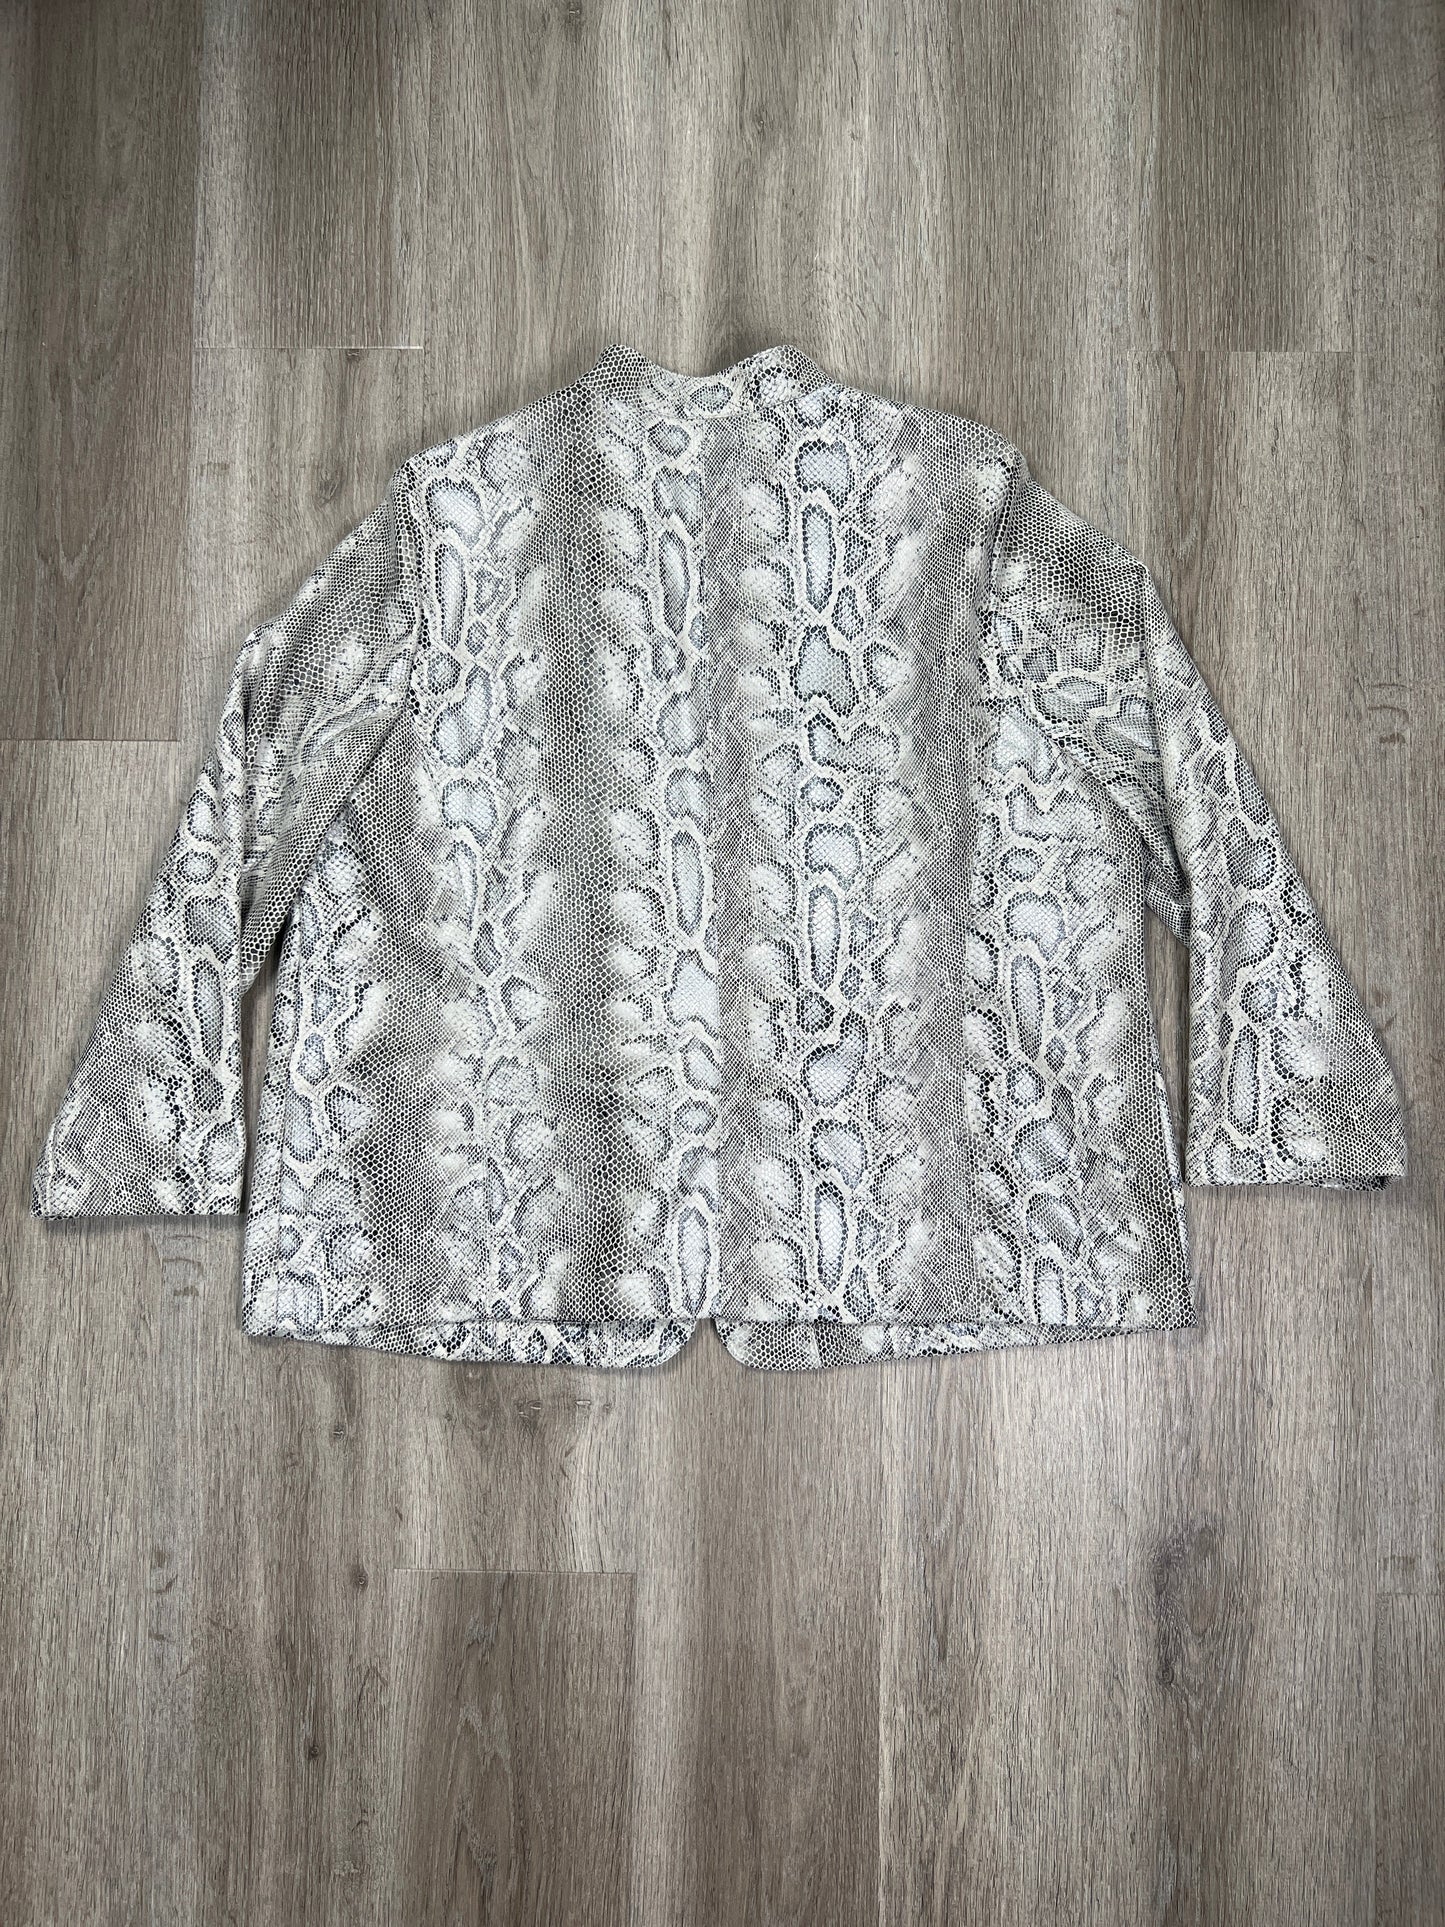 Snakeskin Print Jacket Other Alfred Dunner, Size 2x